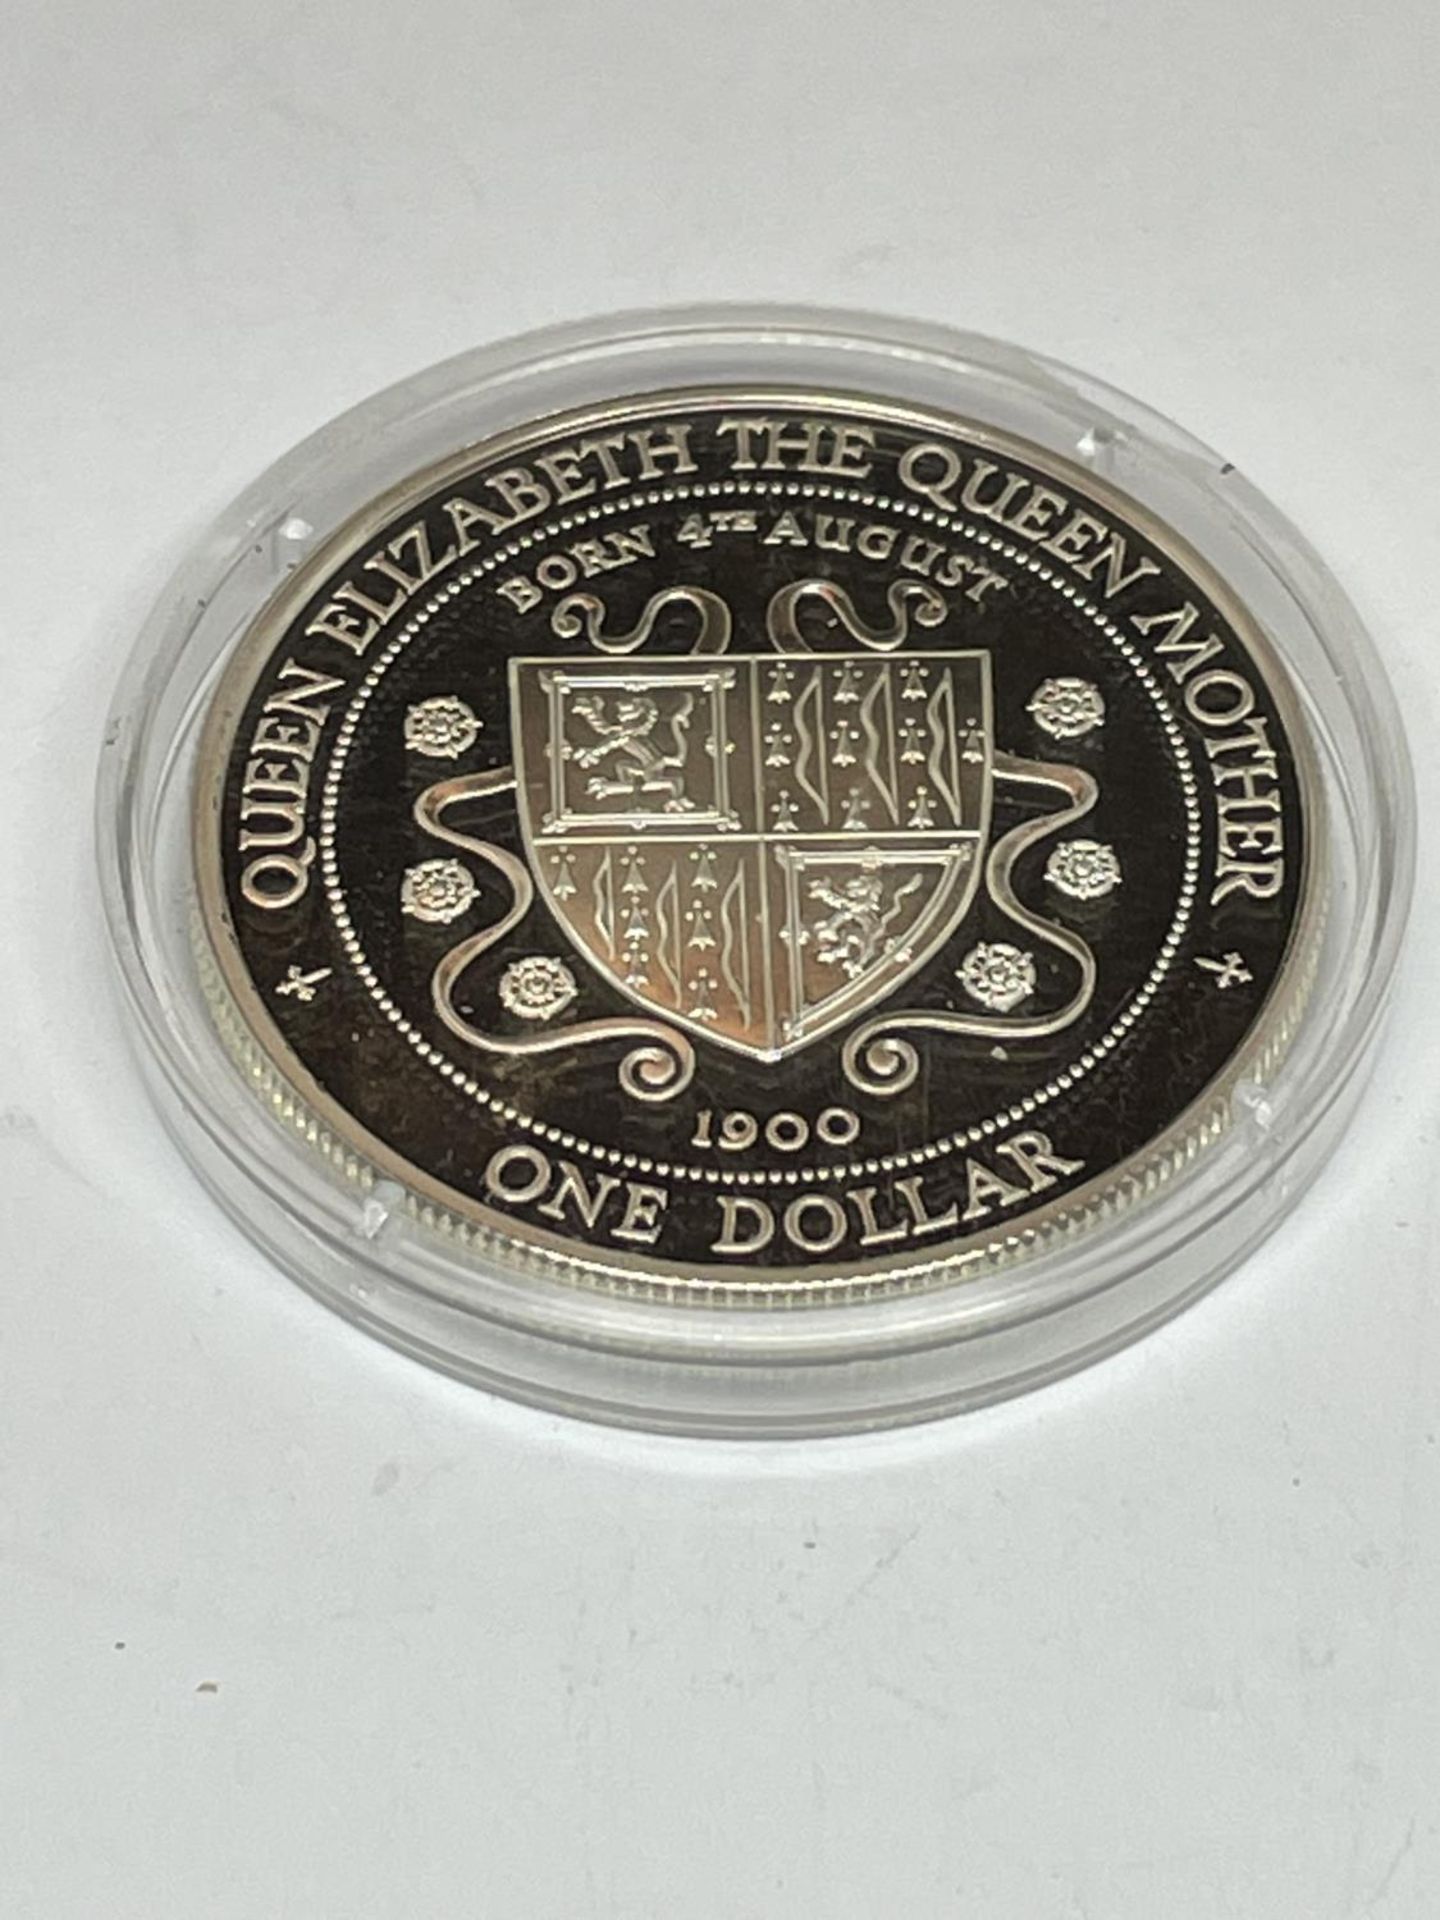 A SILVER PROOF ONE DOLLAR COIN IN A CAPSULE